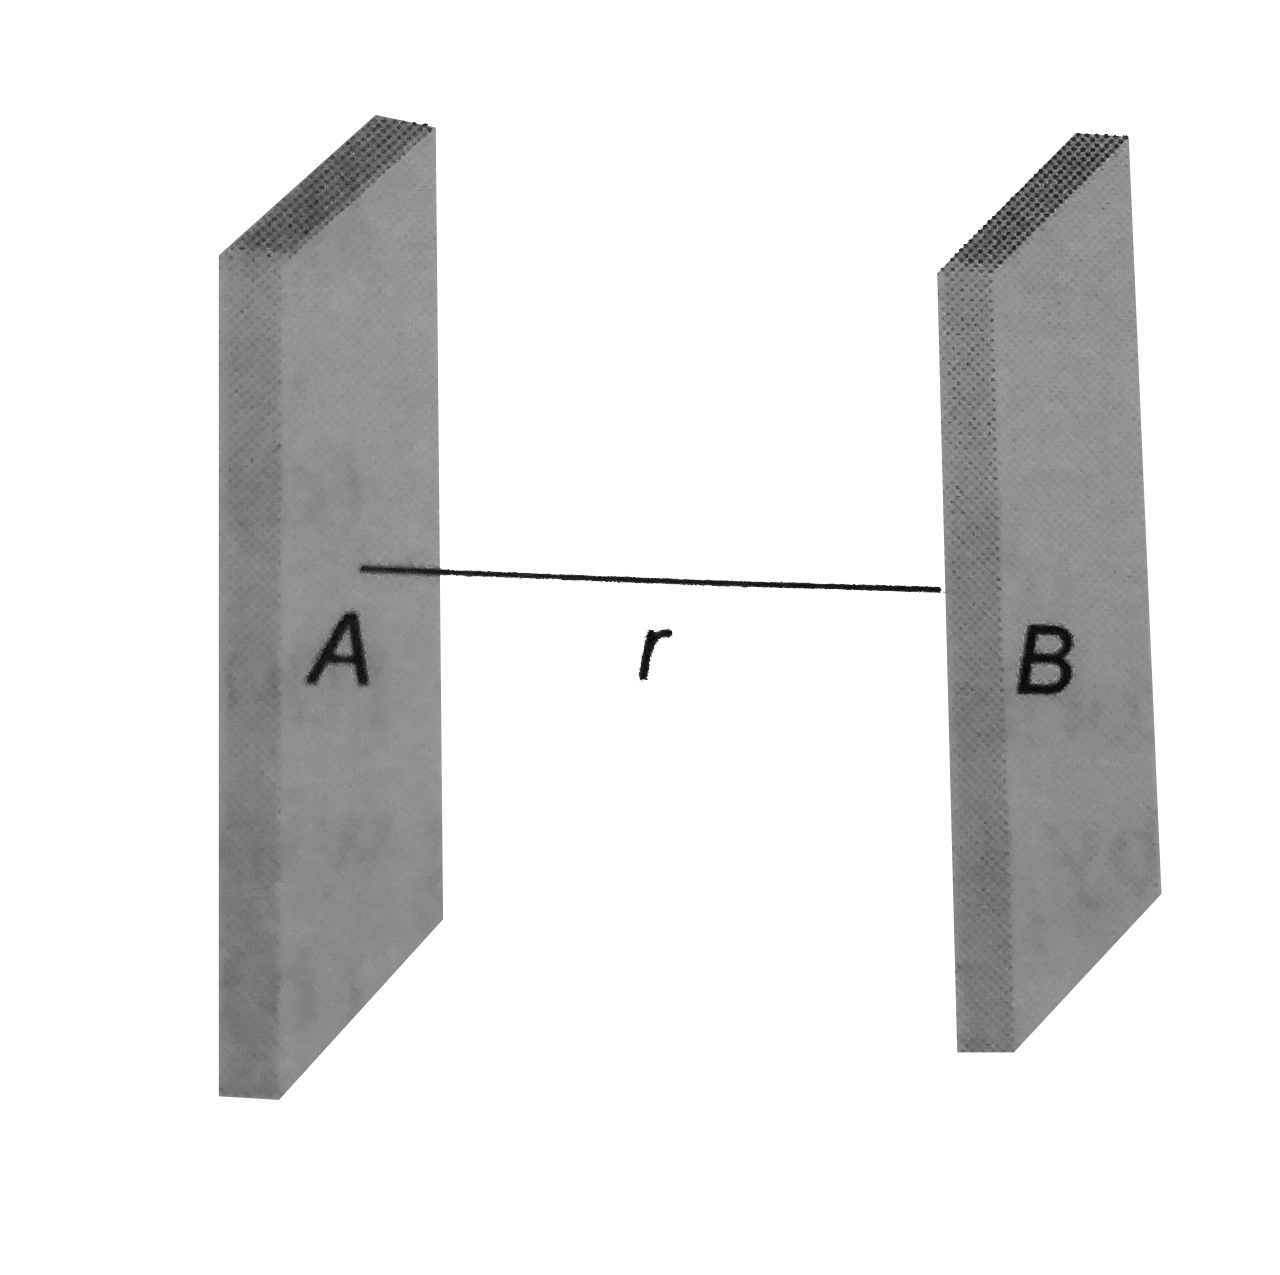 There are two equipotential surafce as shown in figure. The distance between them is r. The charged of -q coulomb is taken from the surface A to B, the resultant work done will be